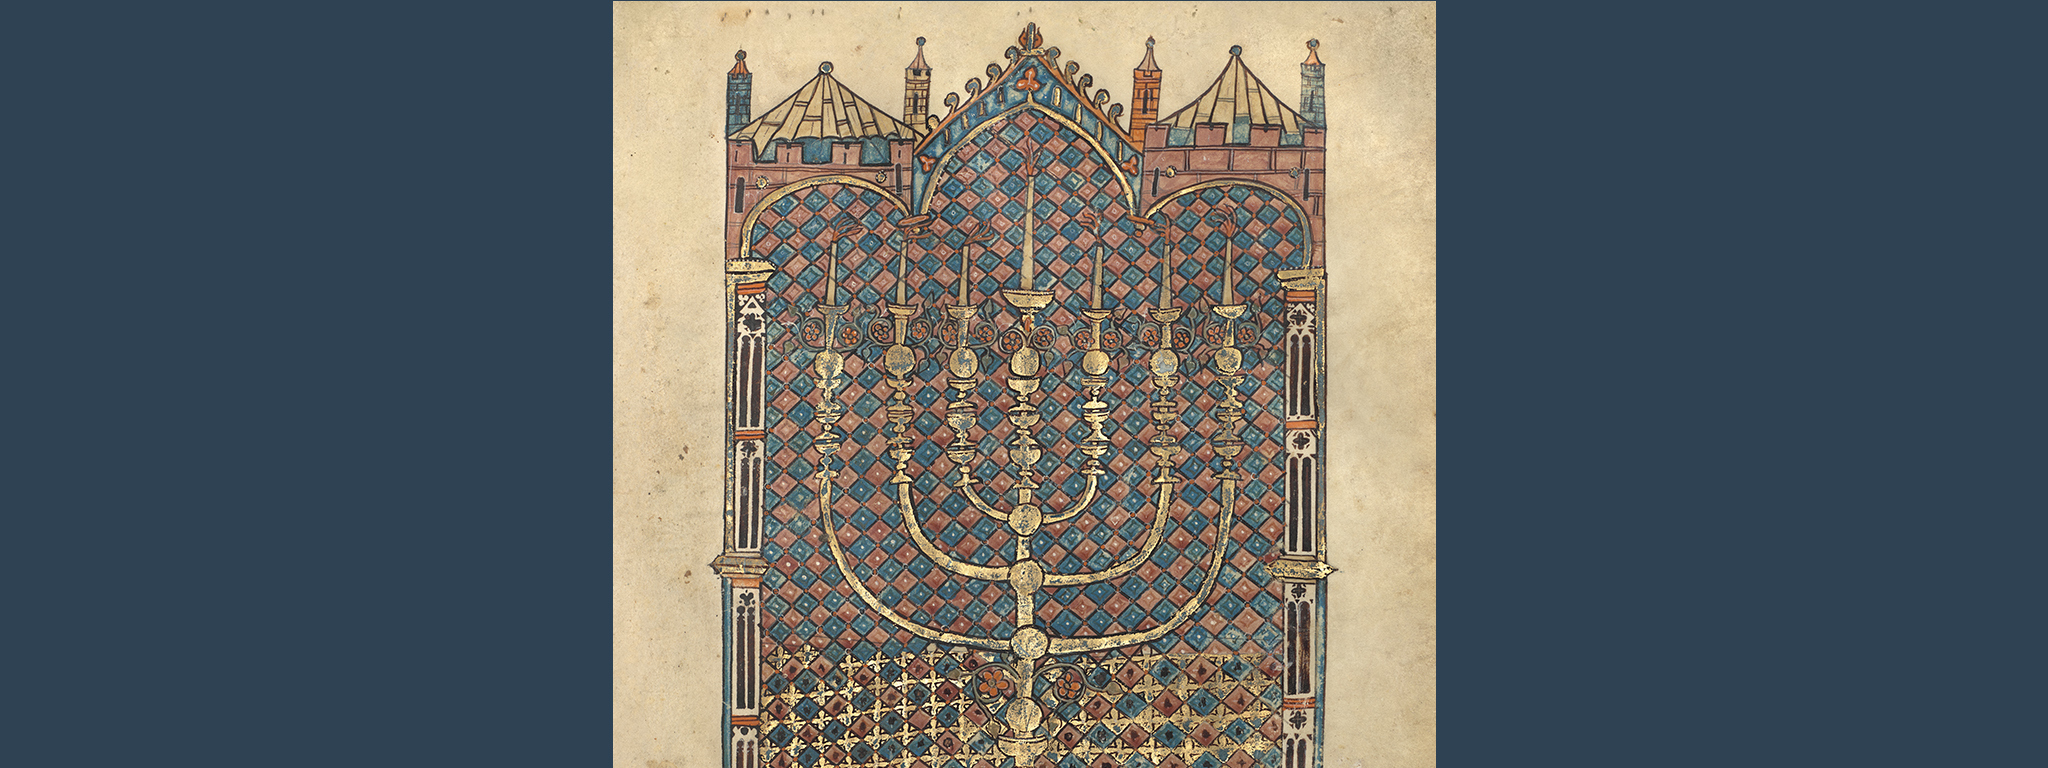 Menorah of the Tabernacle, Book of Leviticus (detail), from the Rothschild Pentateuch, France and/or Germany, 1296; artist unknown. The J. Paul Getty Museum. Acquired with the generous support of Jo Carole and Ronald S. Lauder